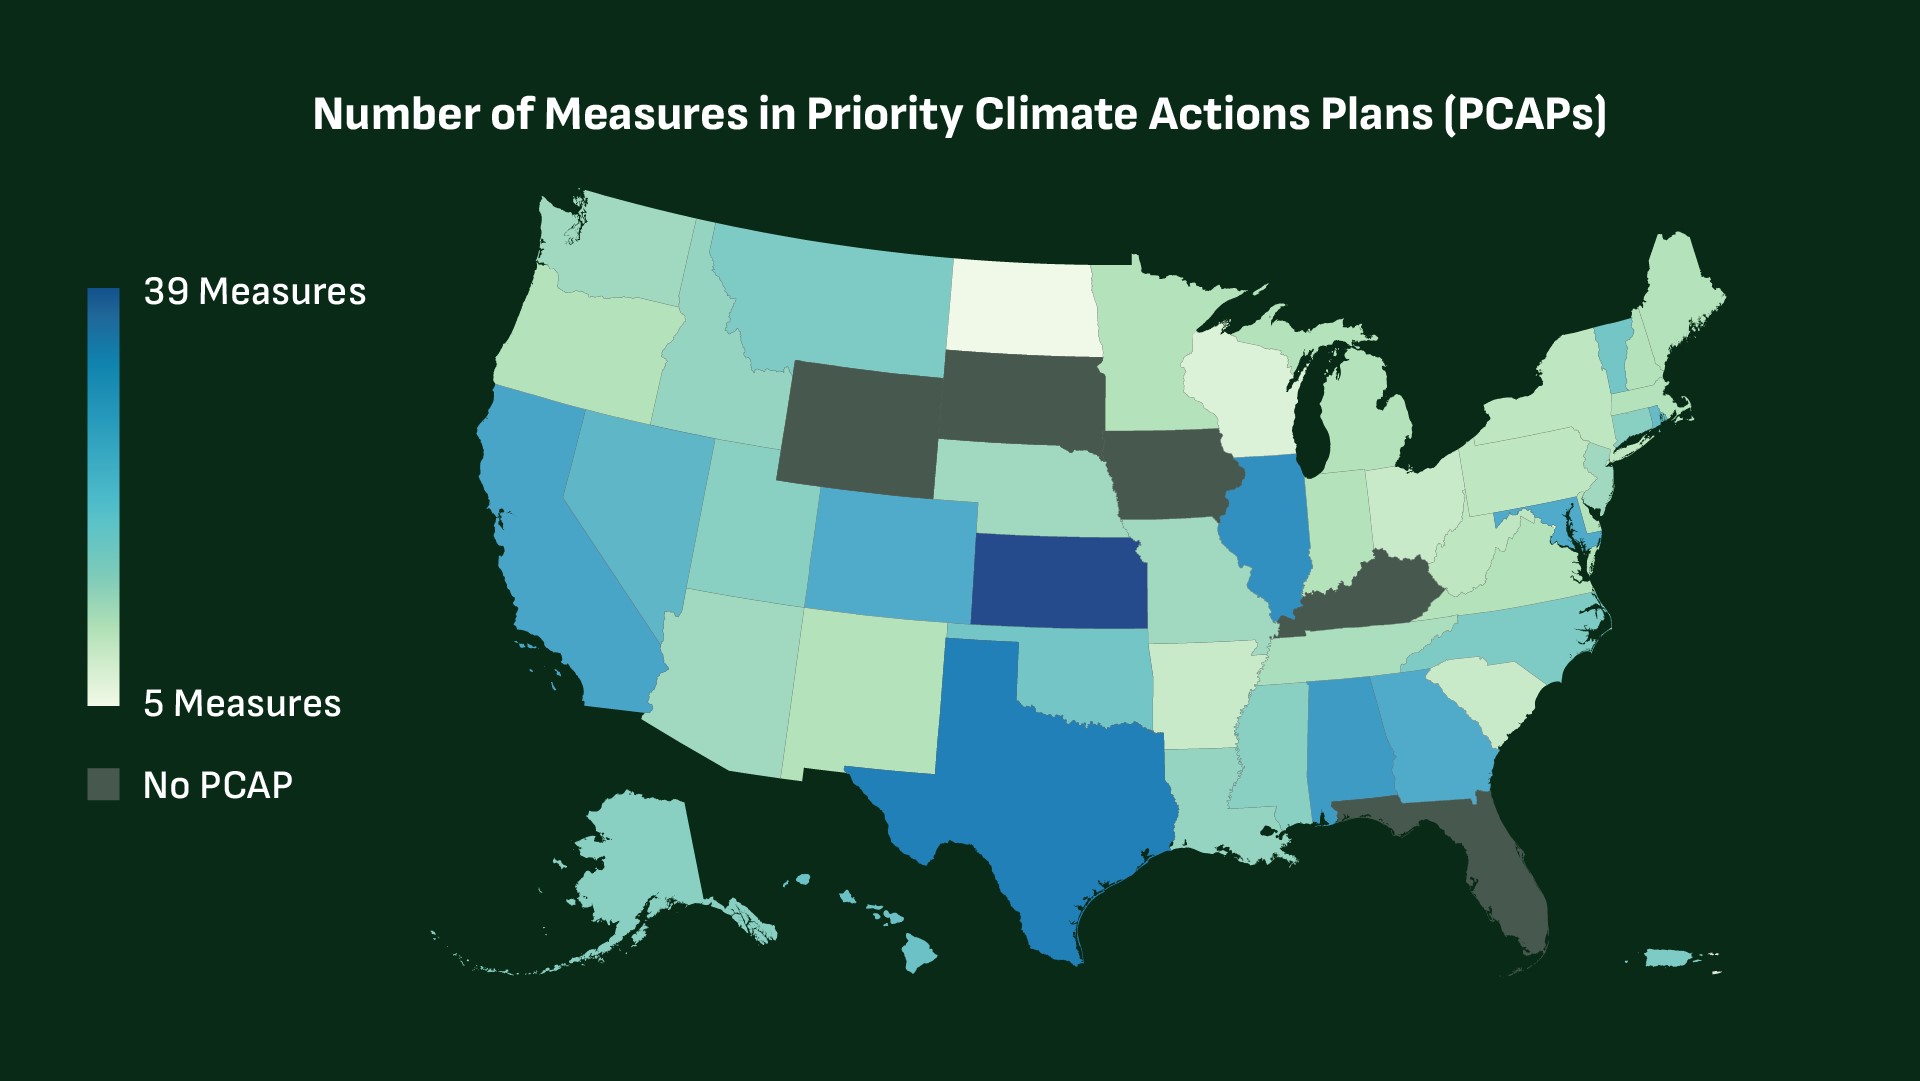 A heatmap of the United States describing the number of measures each state included in their Priority Climate Action Plan. The smallest amount of measures a state included was 5 (North Dakota) and the highest was 39 (Kansas).